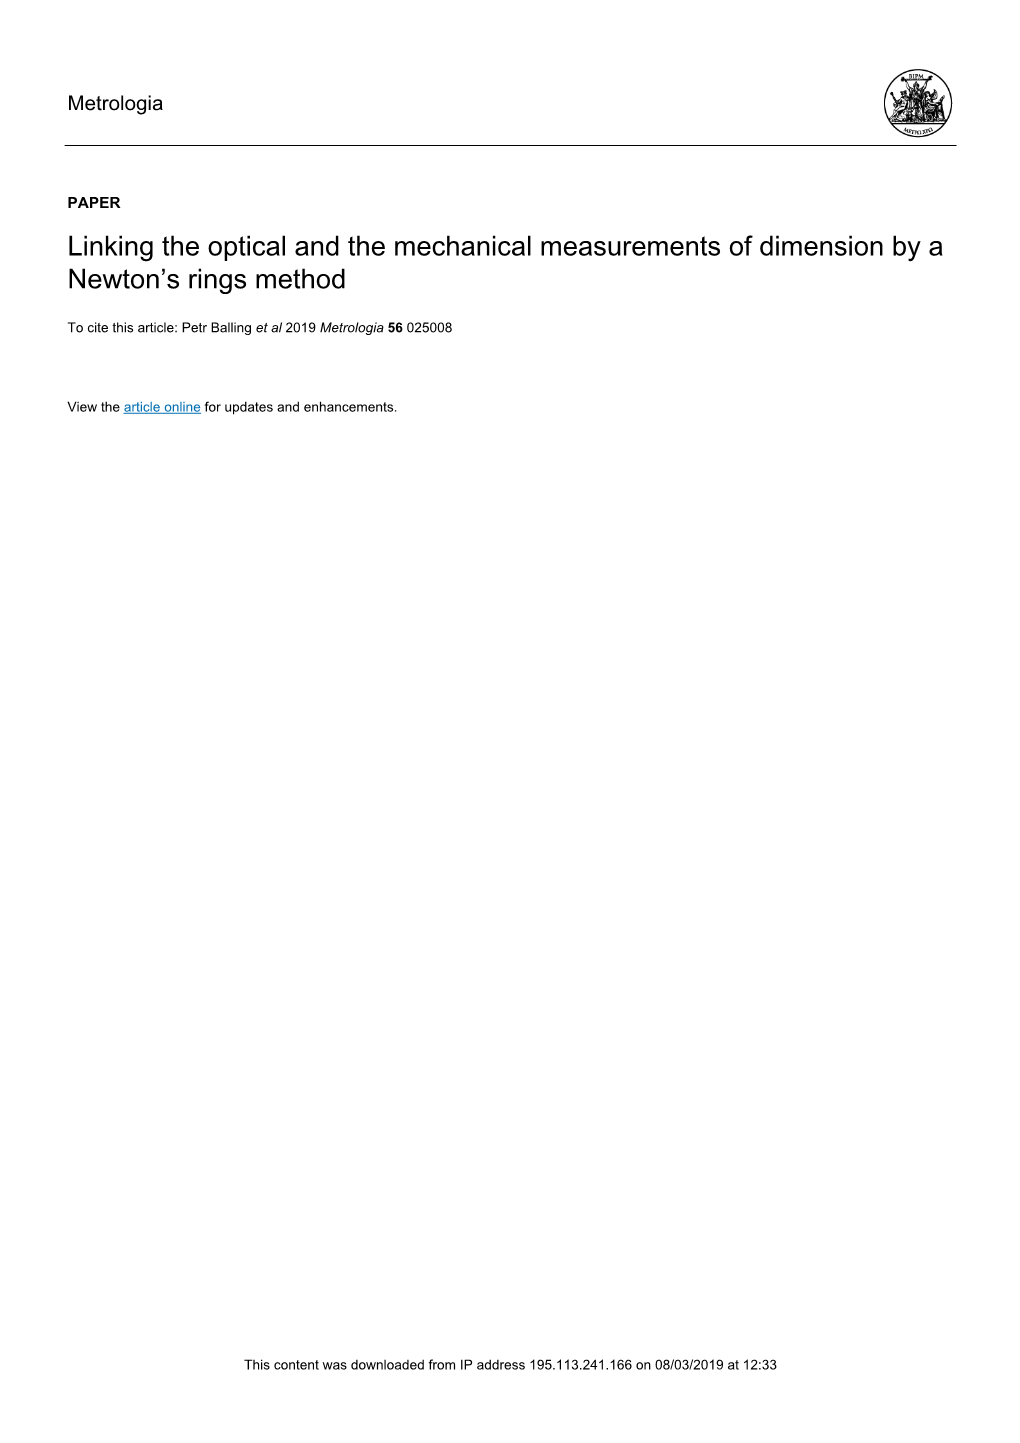 Linking the Optical and the Mechanical Measurements of Dimension by a Newton’S Rings Method